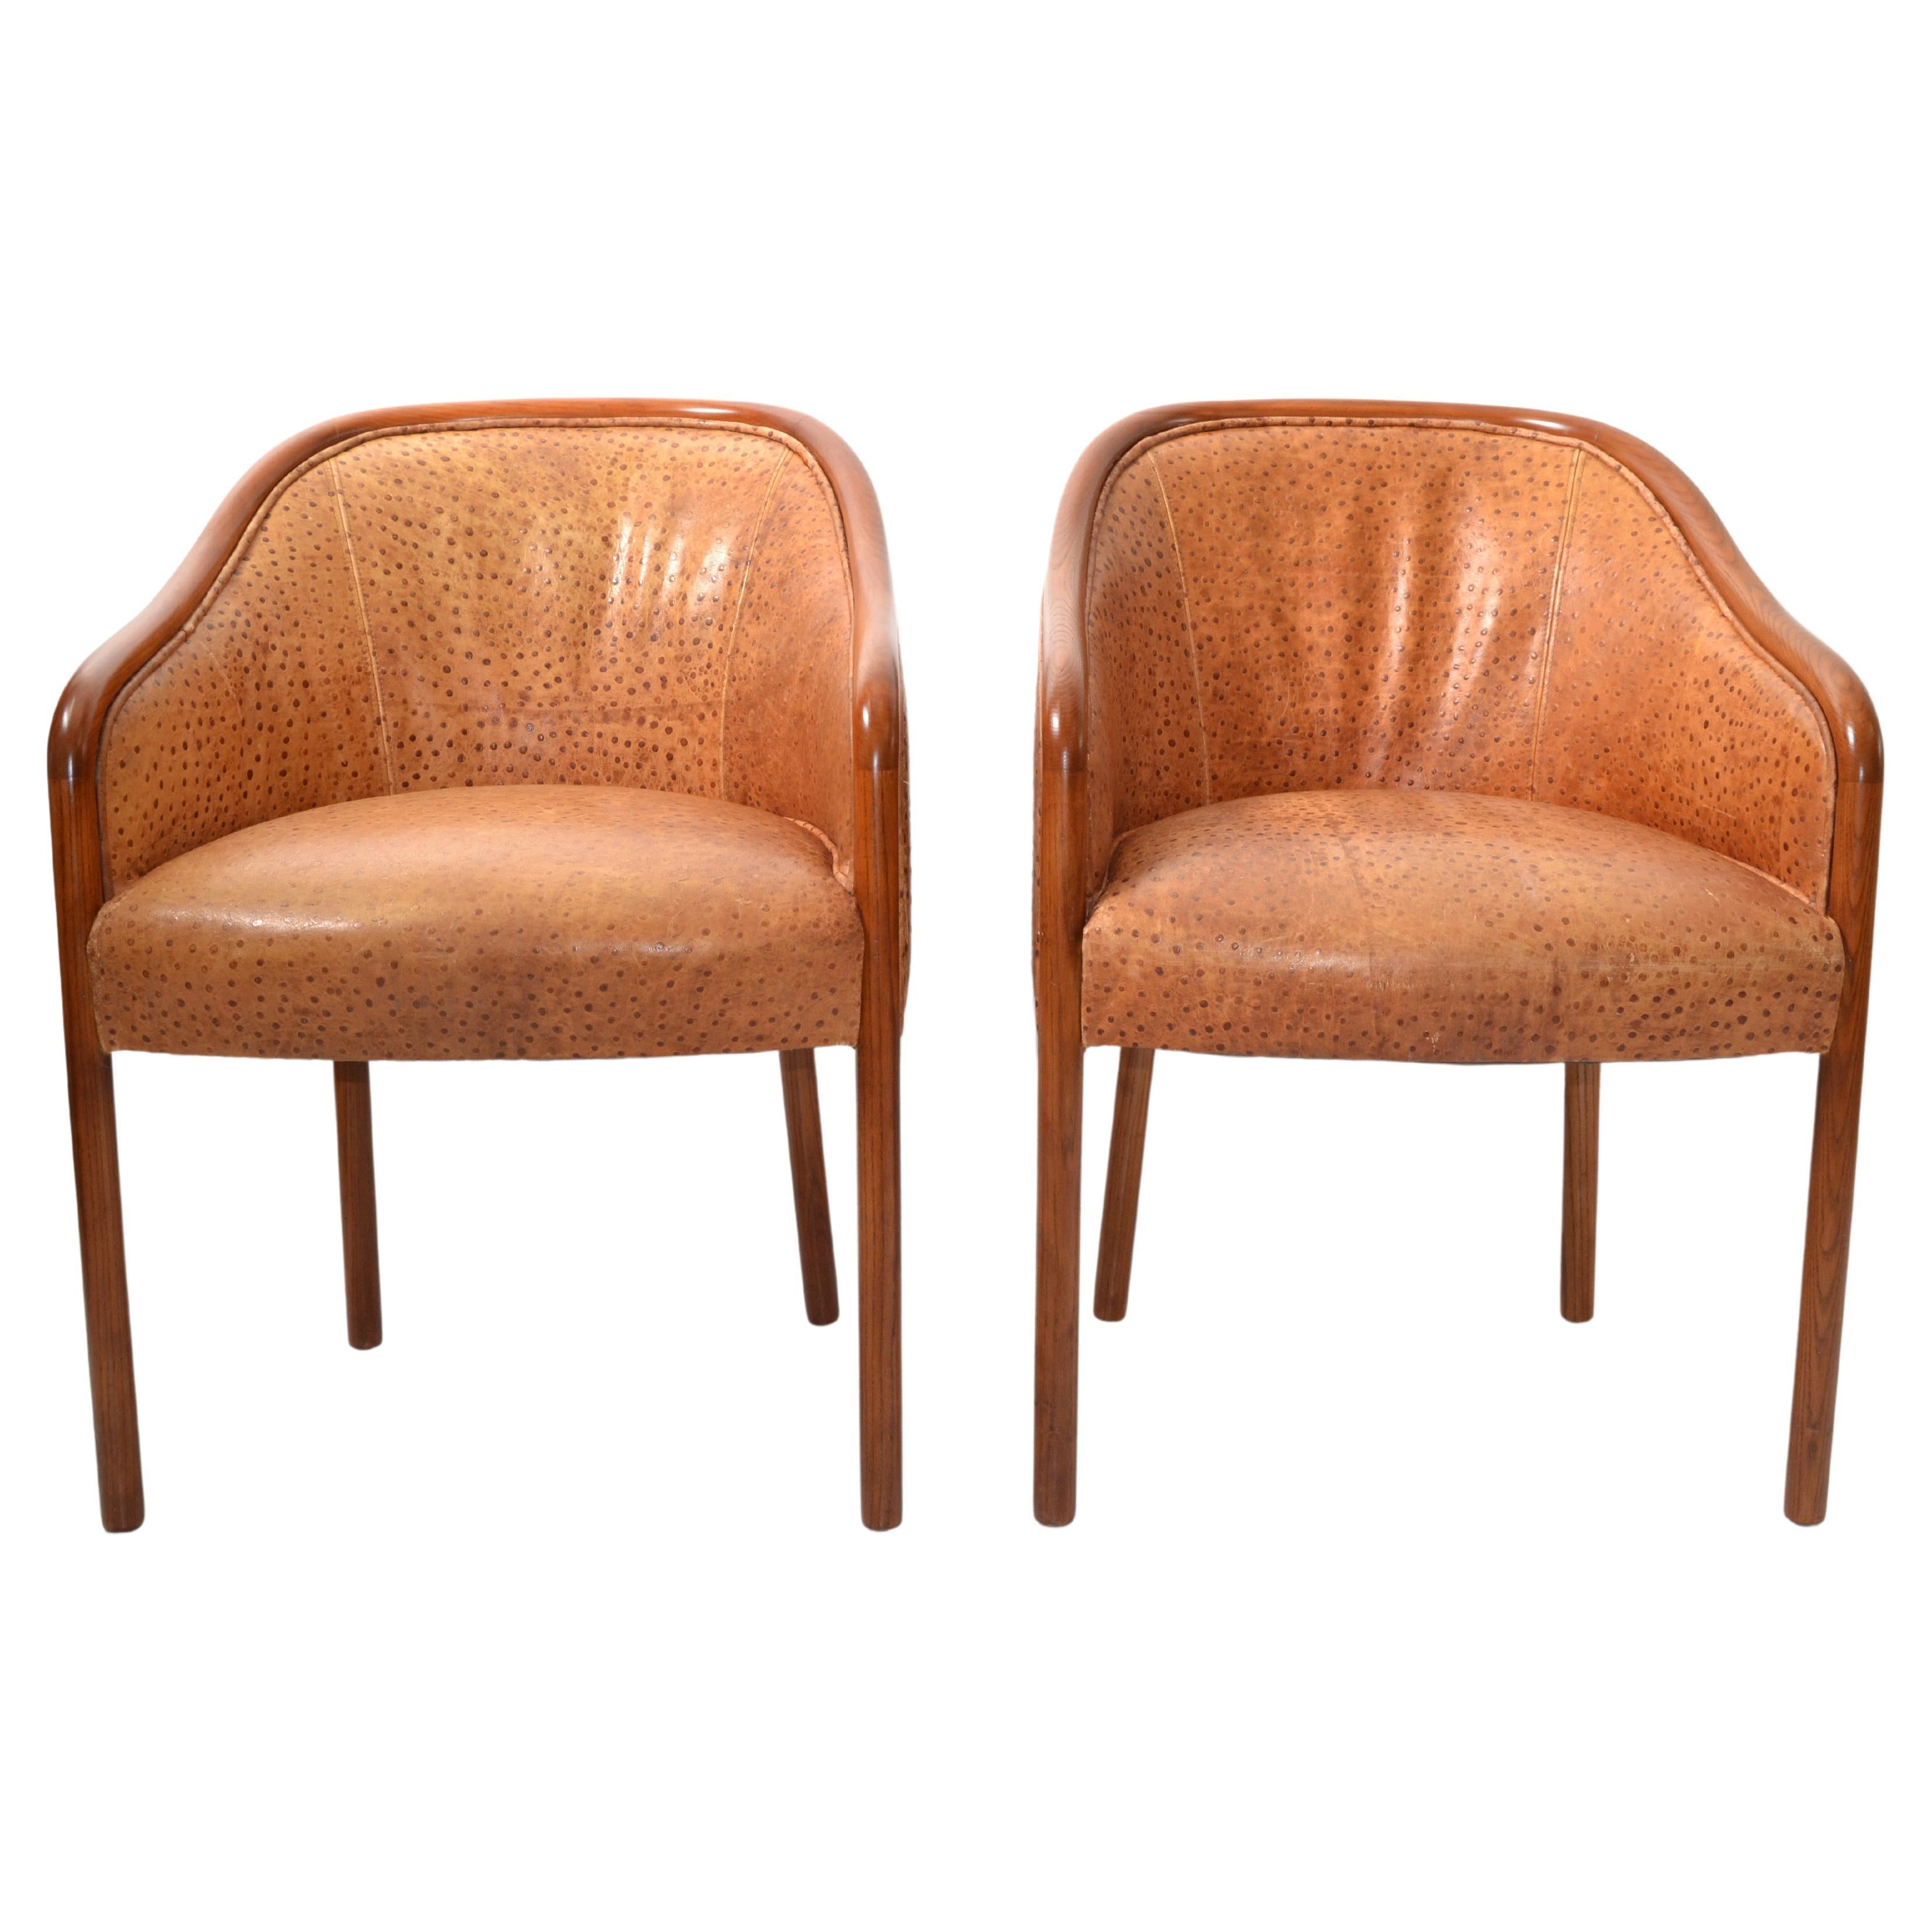 Pair, Ward Bennet Oak Armchairs Ostrich Leather Upholstery Mid-Century Modern